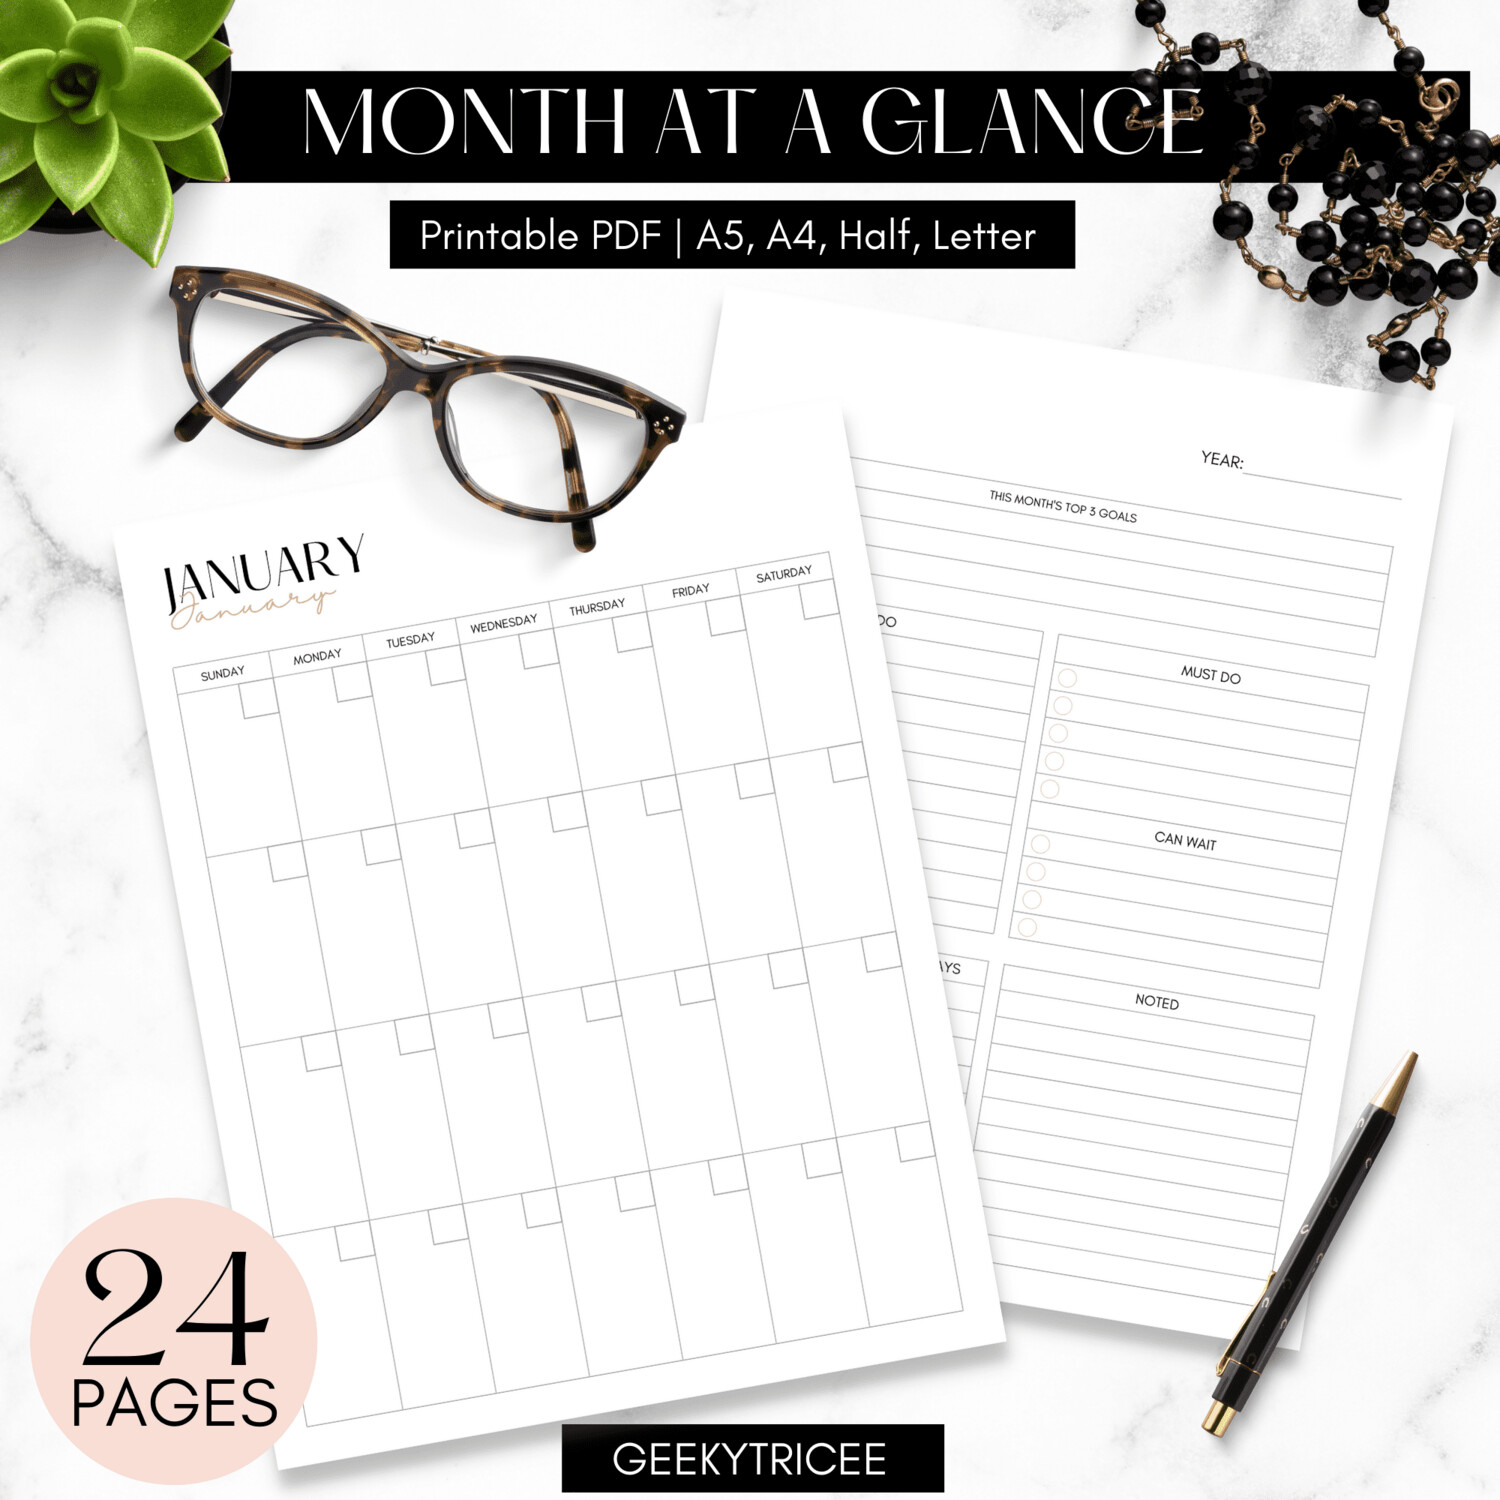 Month-at-a-Glance | A5 A4 Letter Half